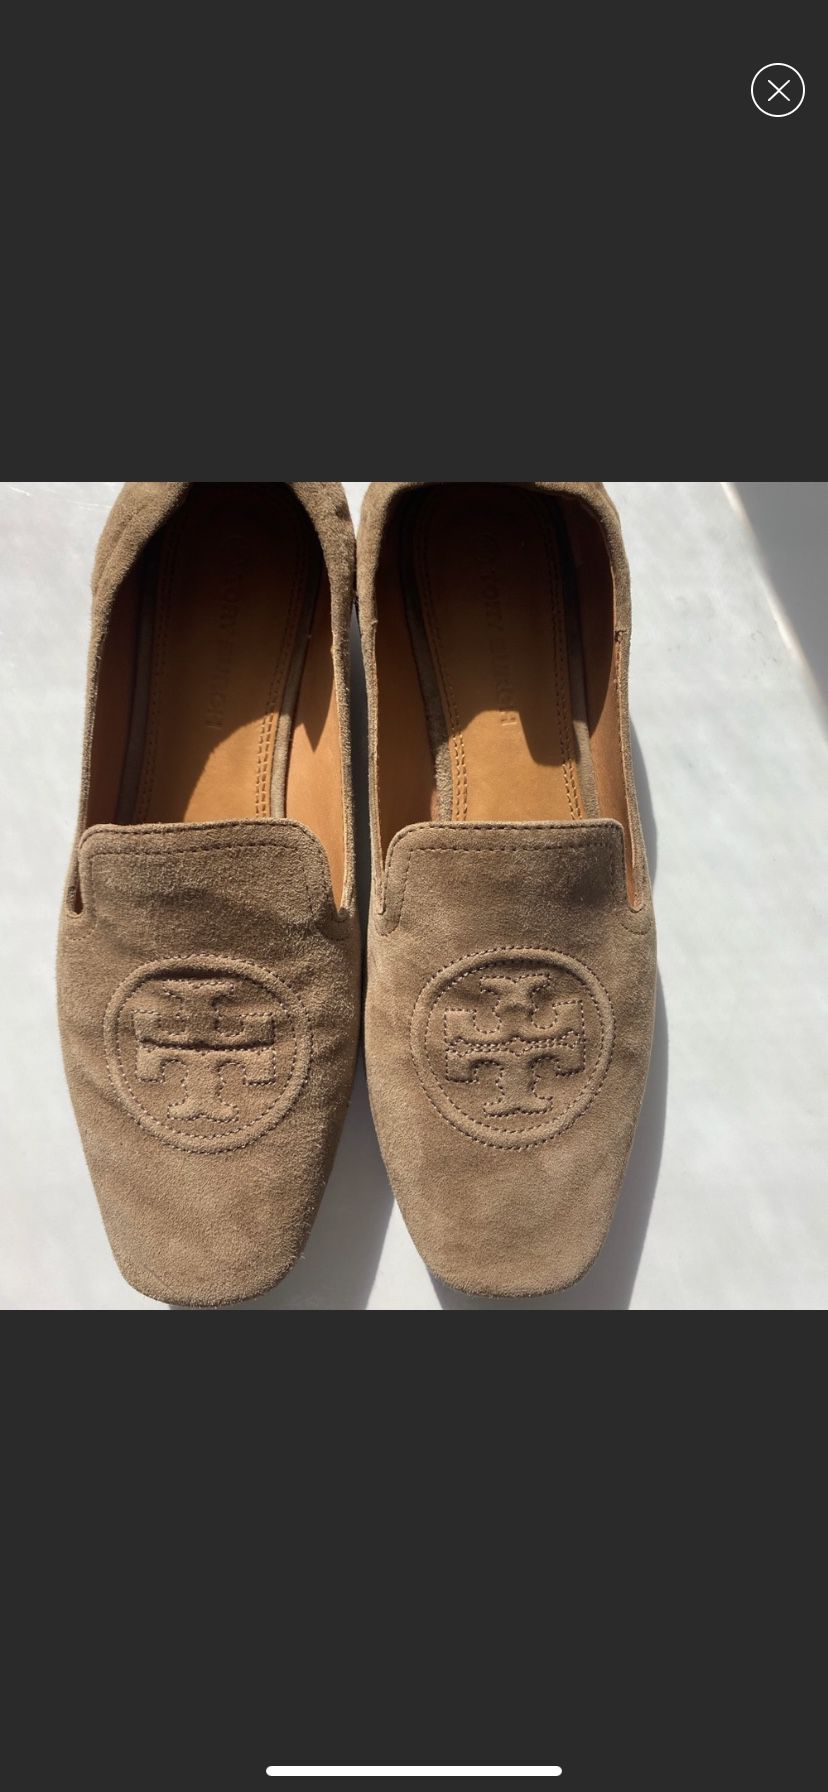 Tory Burch Brown Suede Flats for Sale in Peoria, AZ - OfferUp